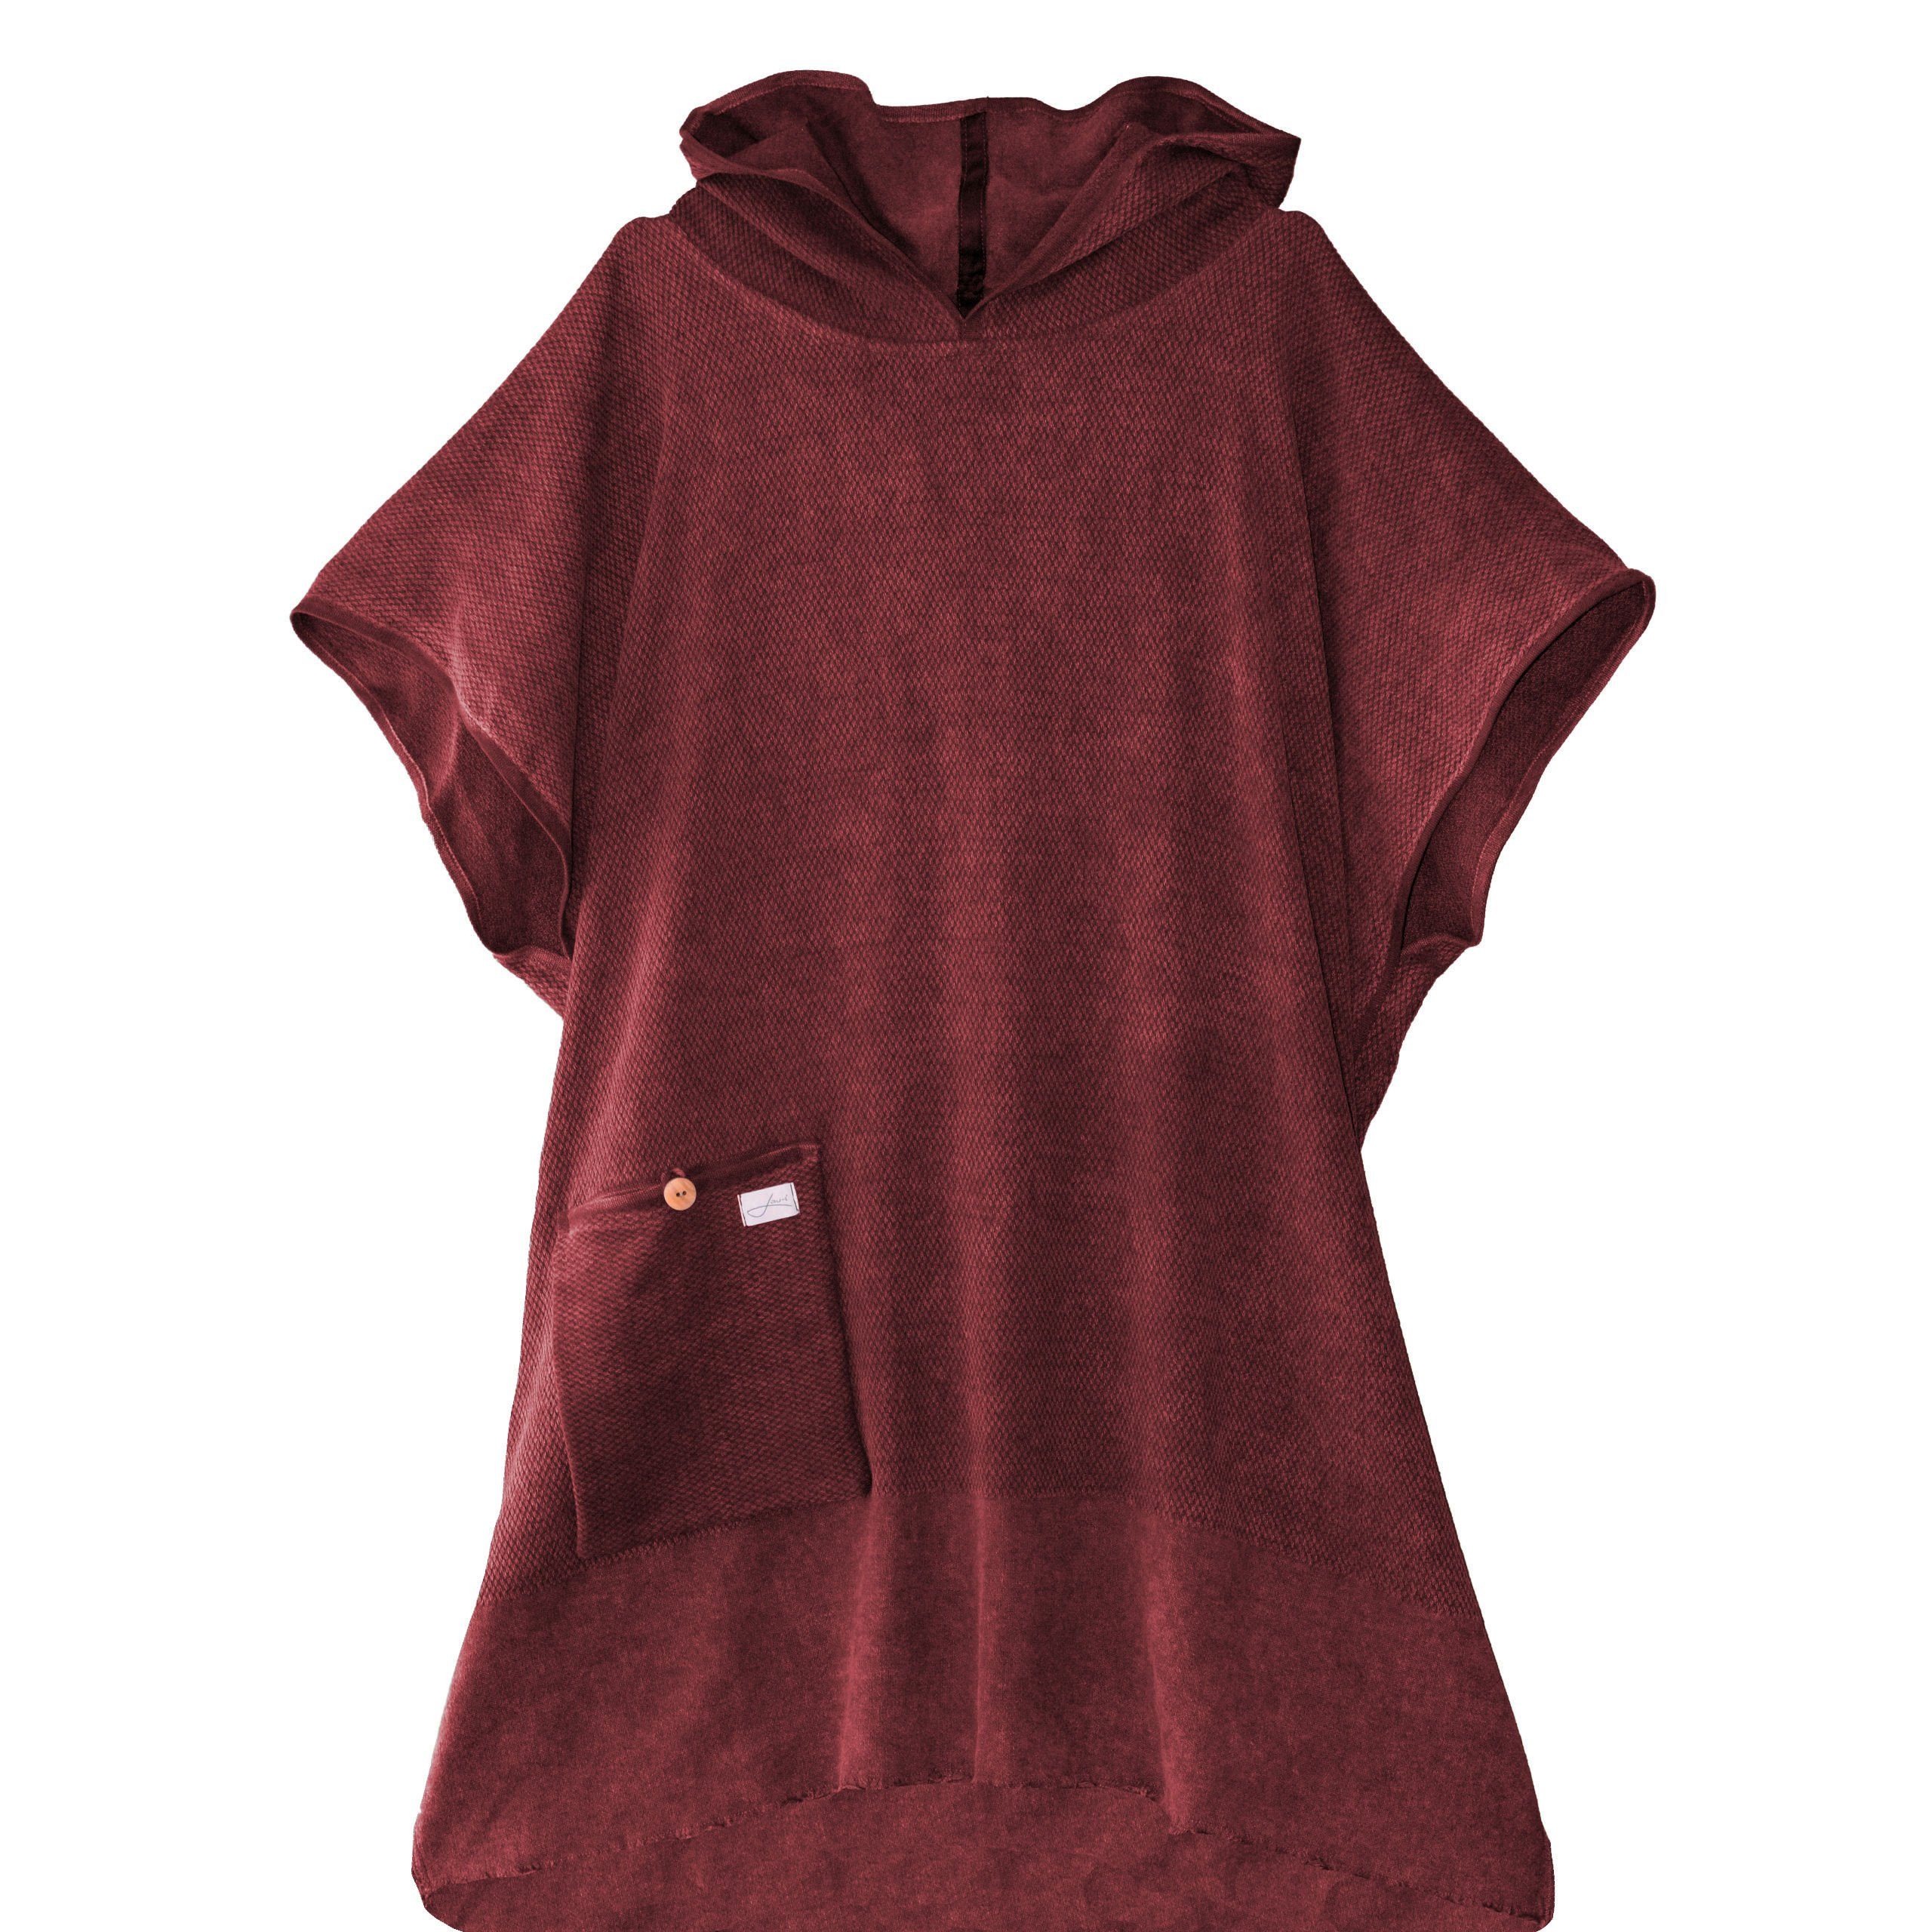 Lou-i Badeponcho Badeponcho Made in Germany Surfponcho (leicht & schnell trocken), Kapuze burgundy